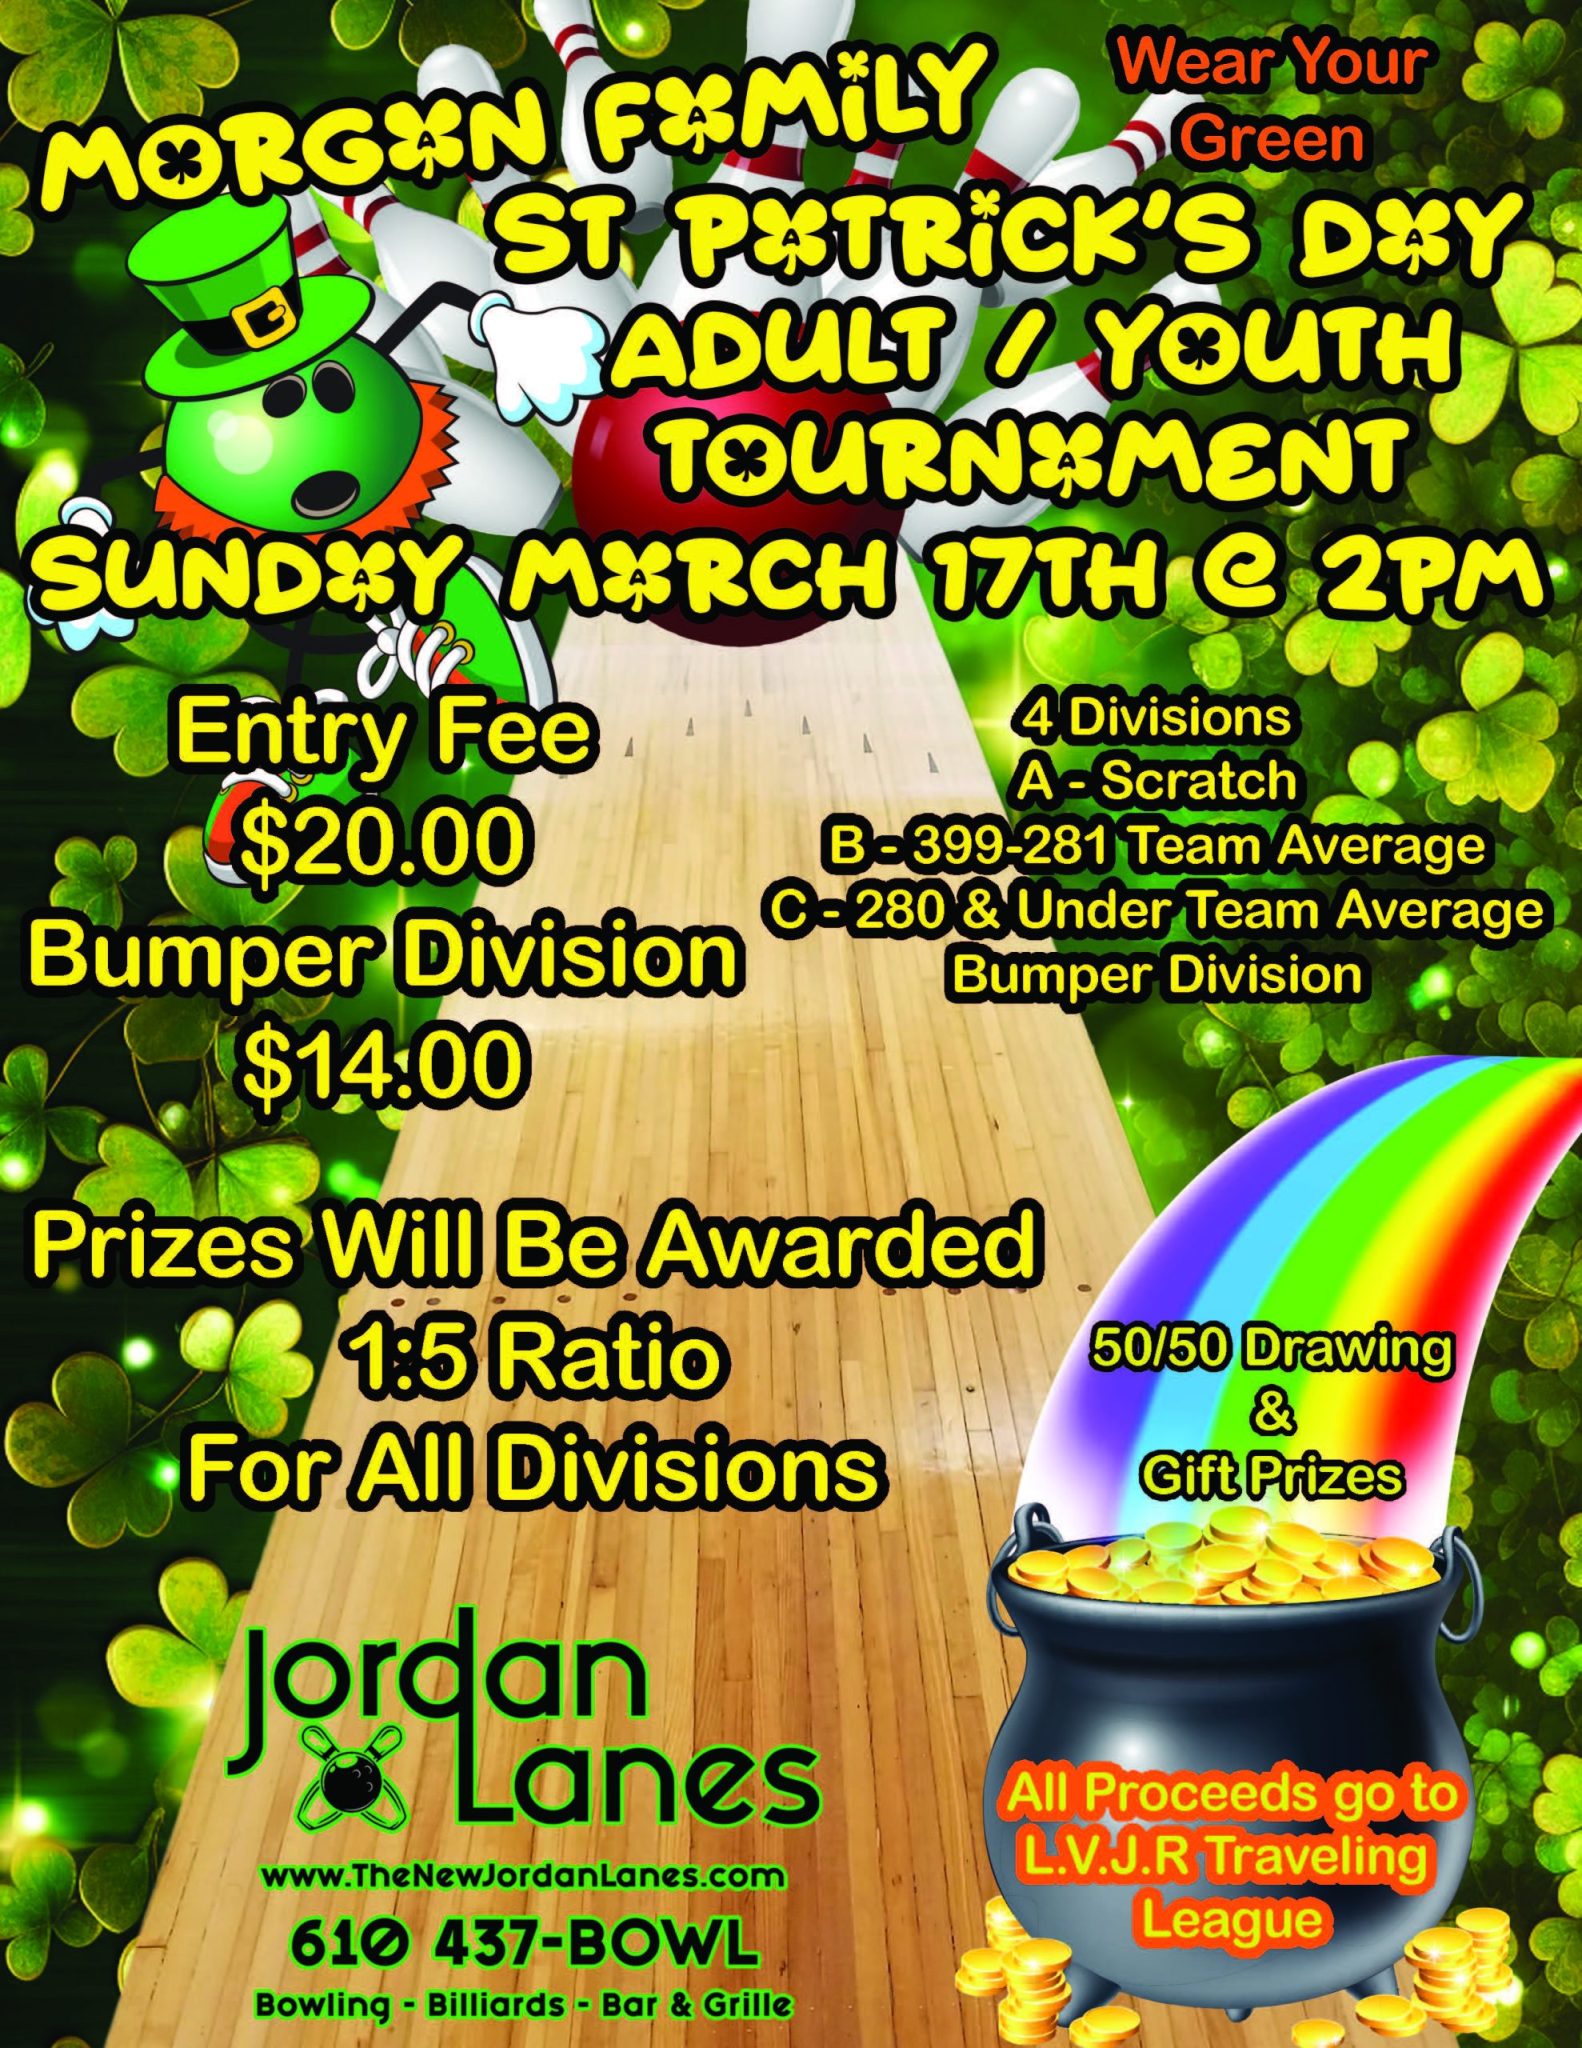 Morgan Family Adult / Youth Tournament 3